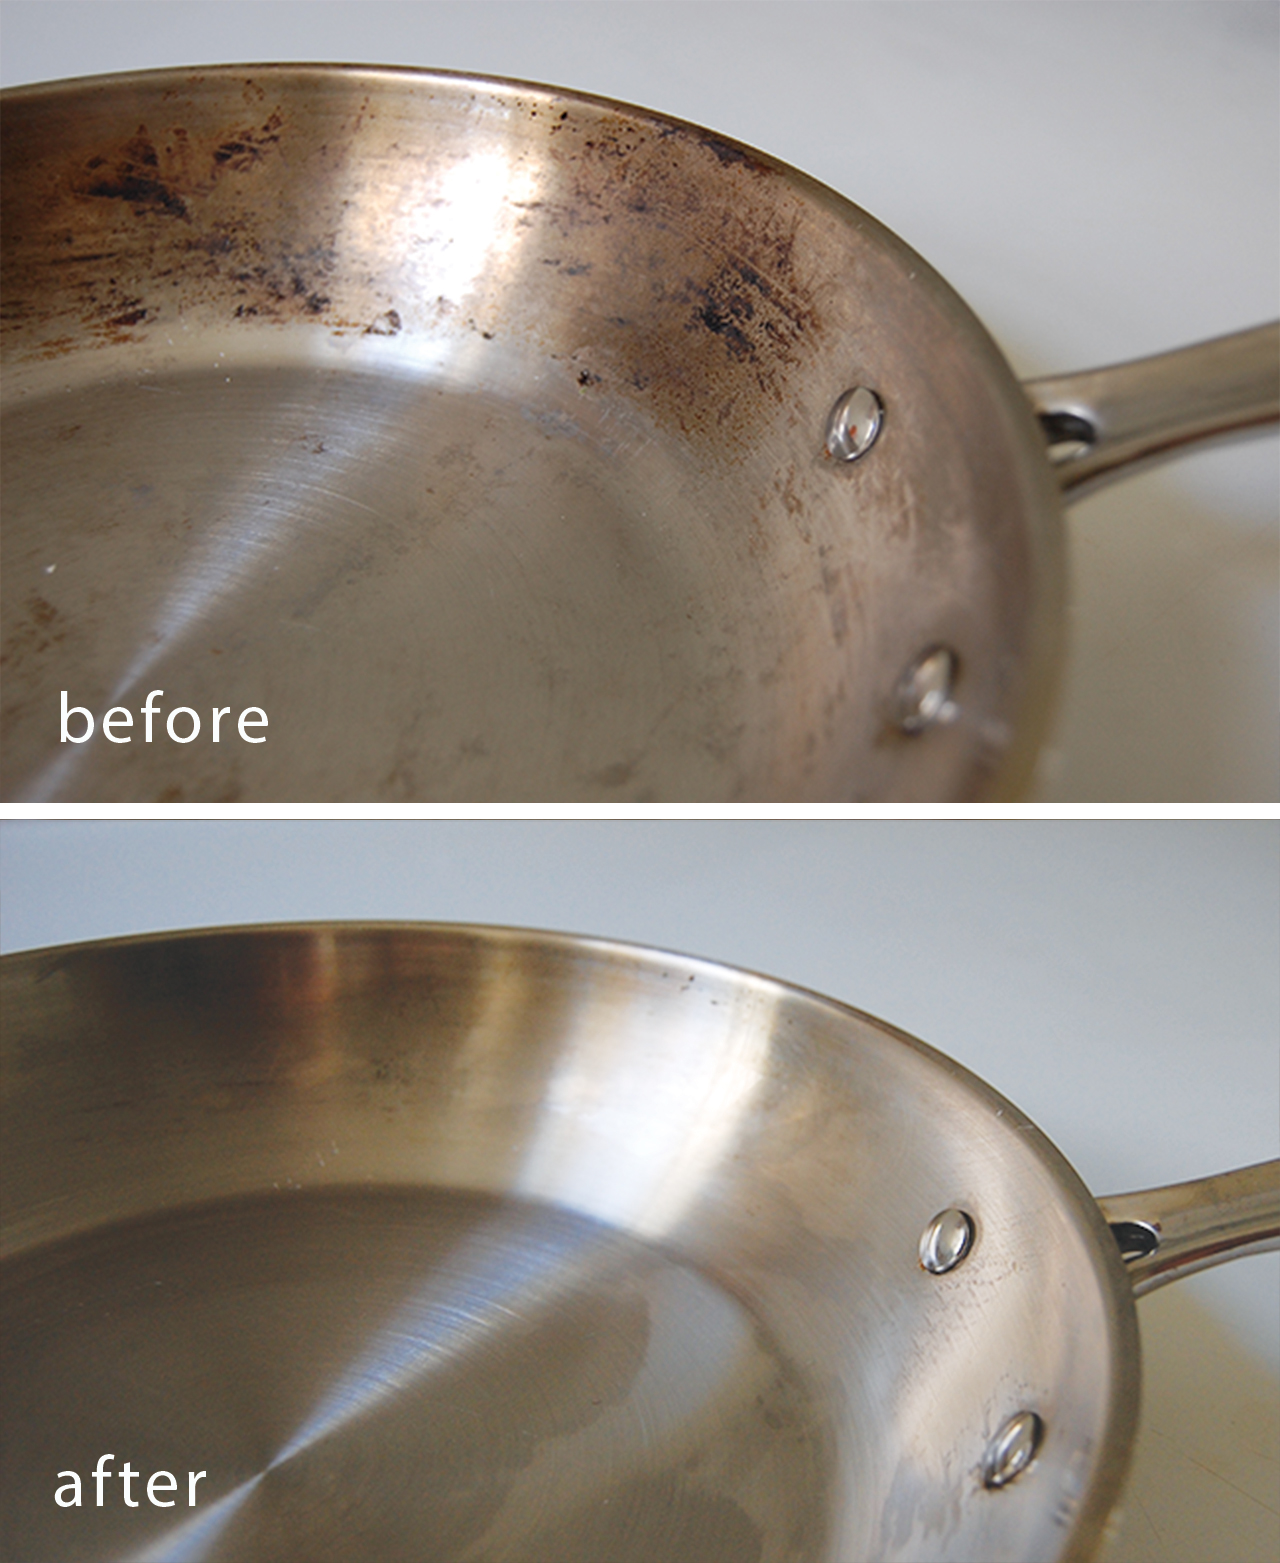 How to clean burnt stainless steel pots and pans naturally